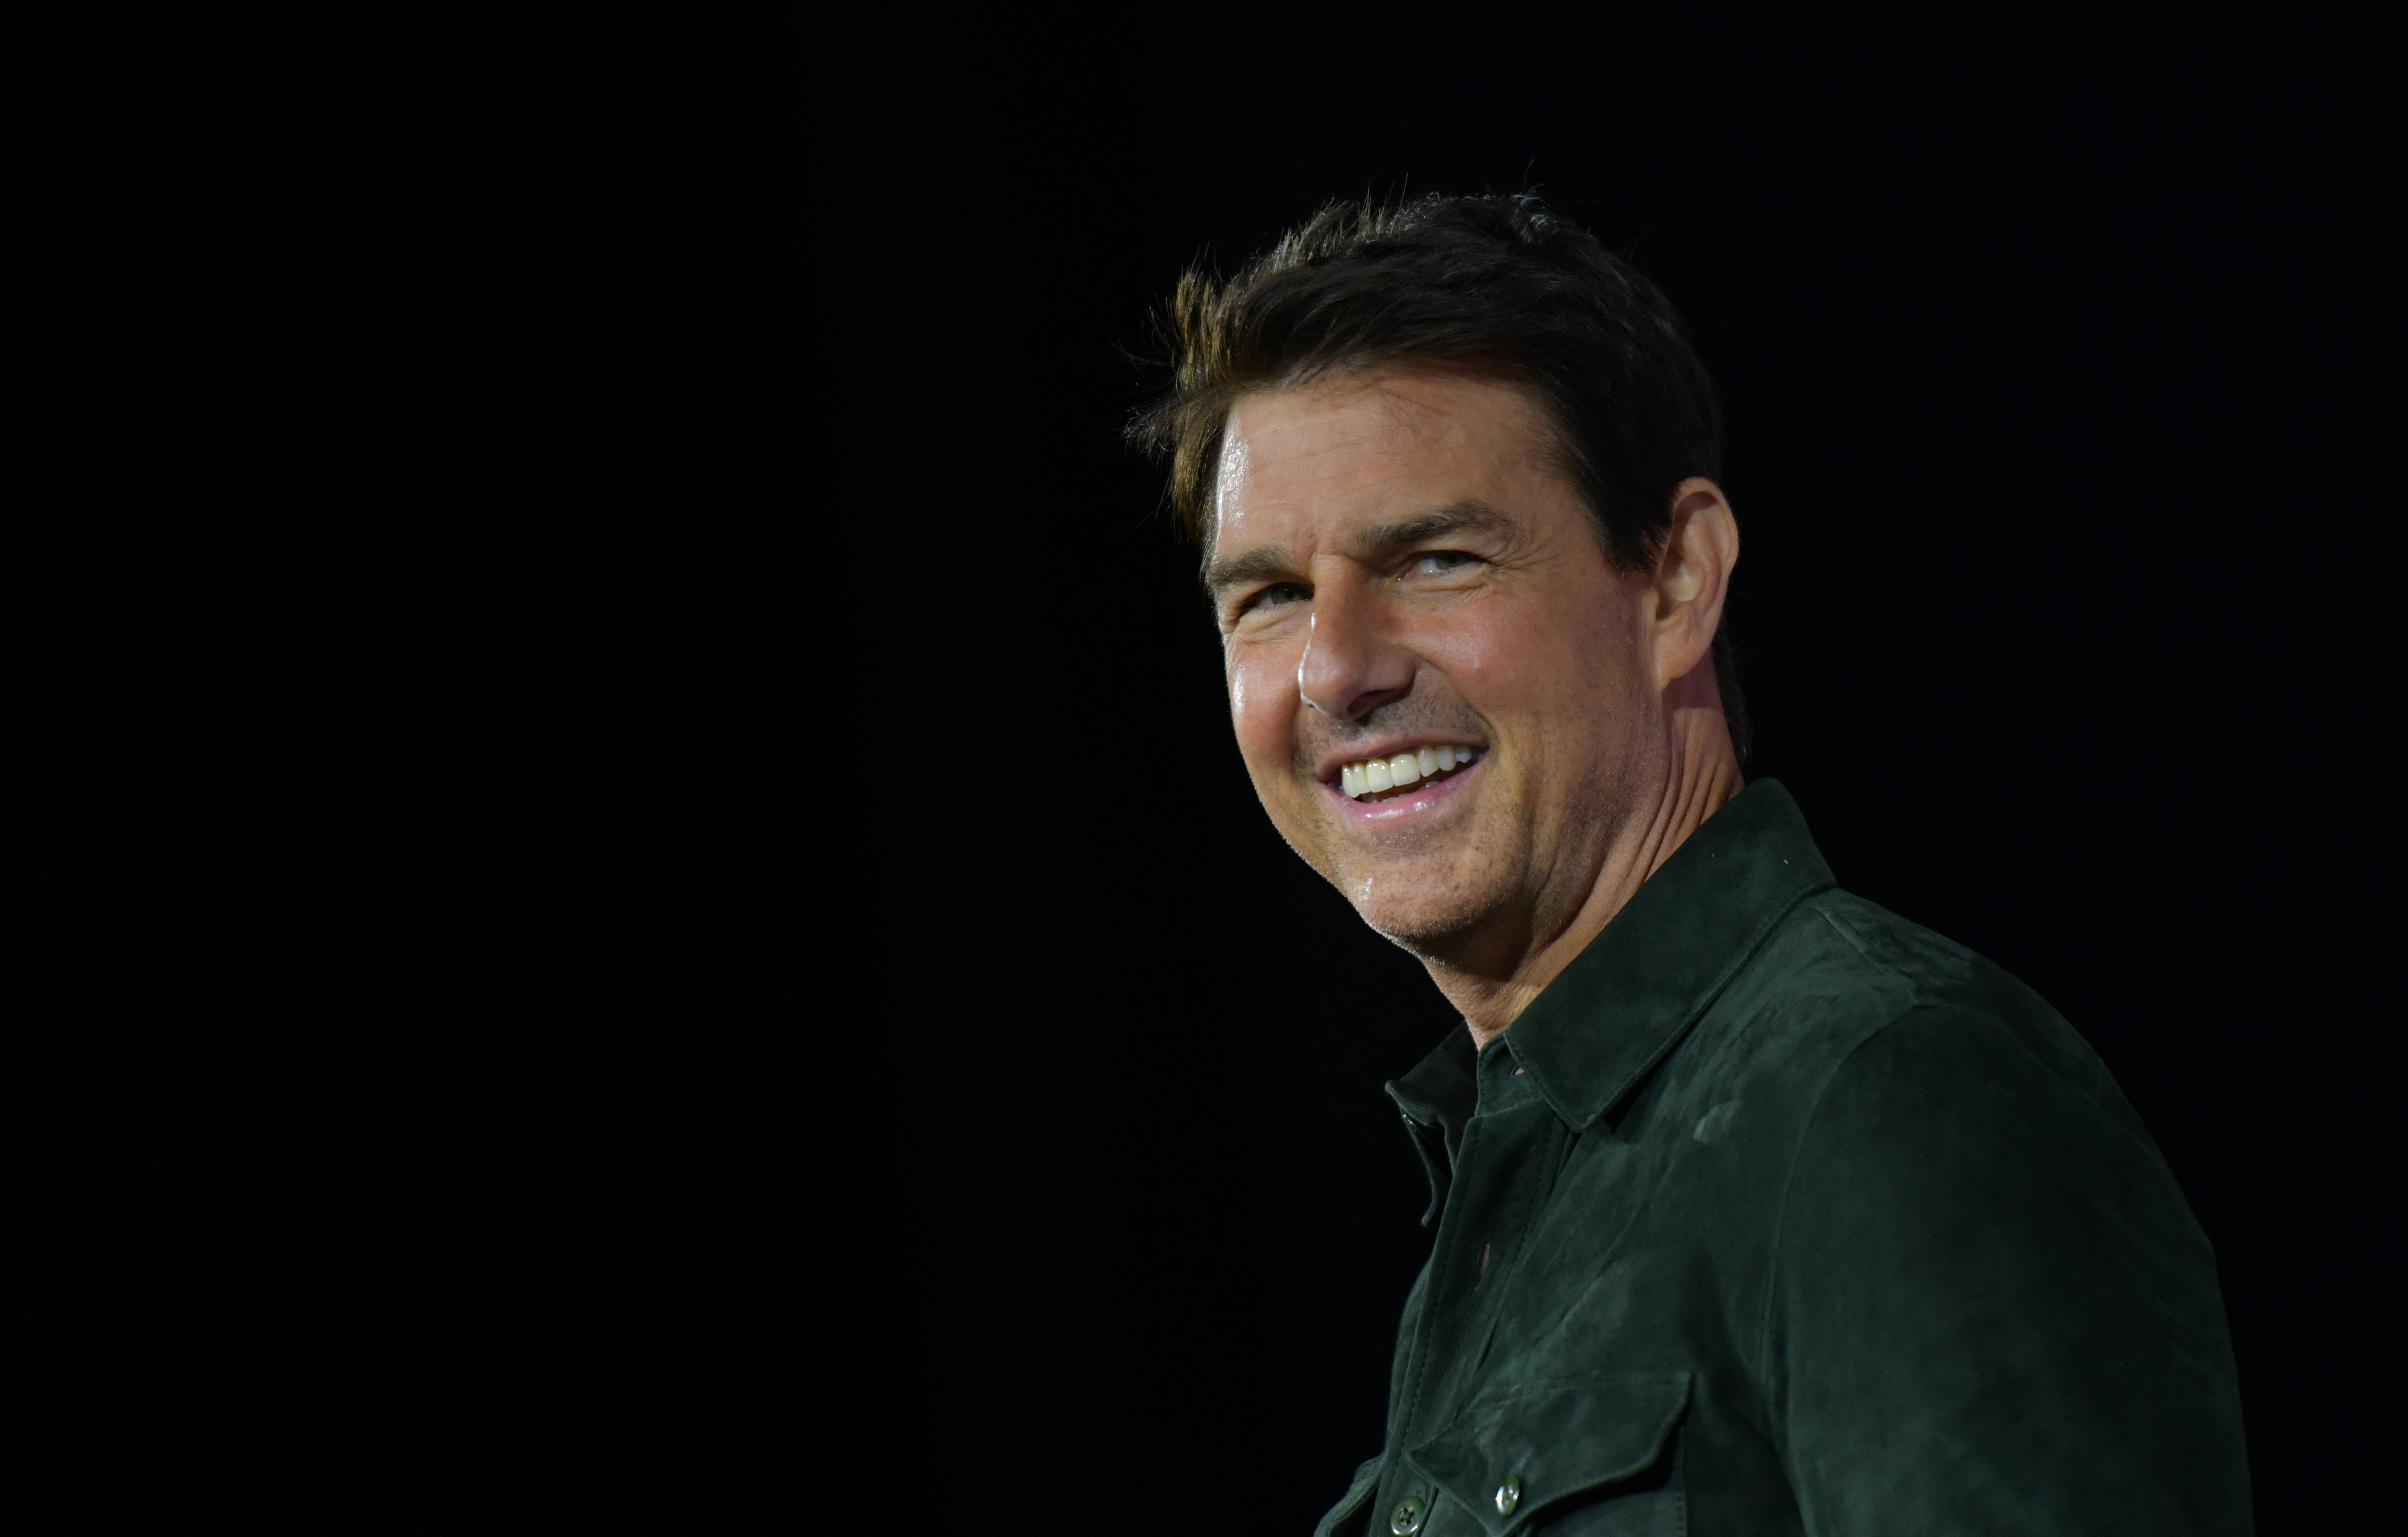 Tom Cruise promoting  "Top Gun: Maverick" at the Convention Center during Comic Con in San Diego, California on July 18, 2019 | Source: Getty Images